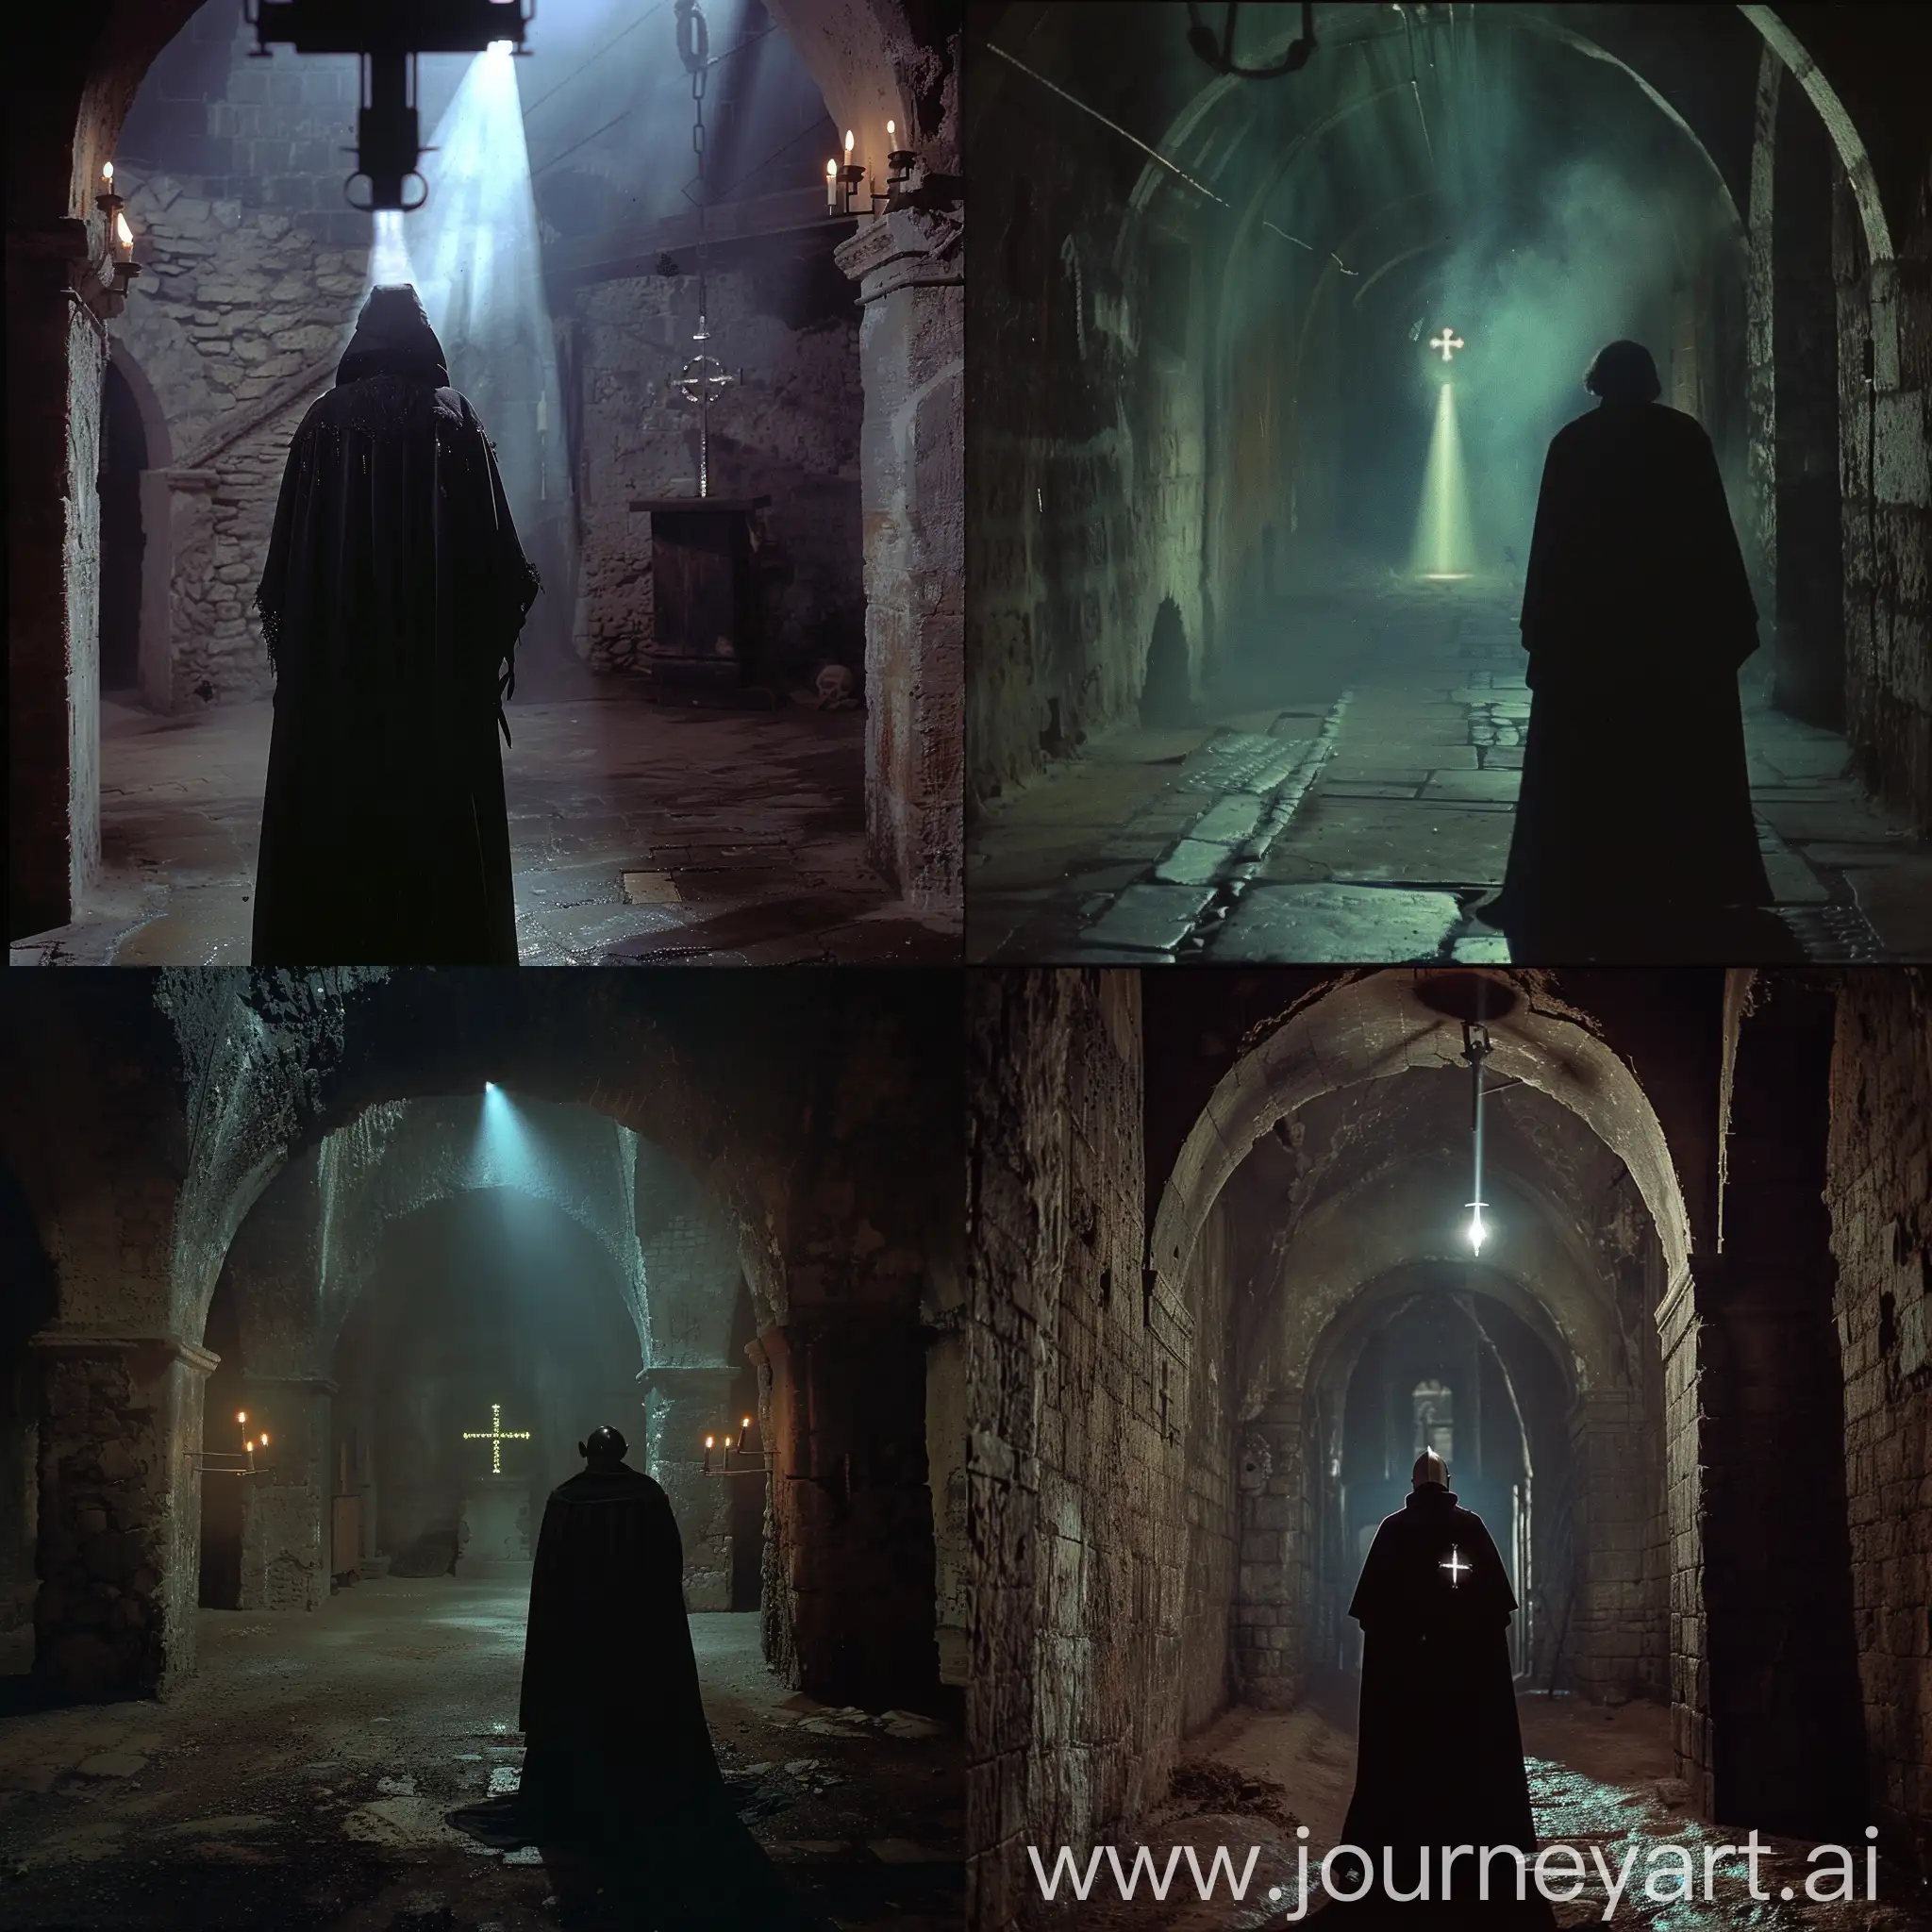 Dark-Fantasy-Inquisitor-in-Black-Cassock-with-Cross-and-Magic-Light-in-Dungeon